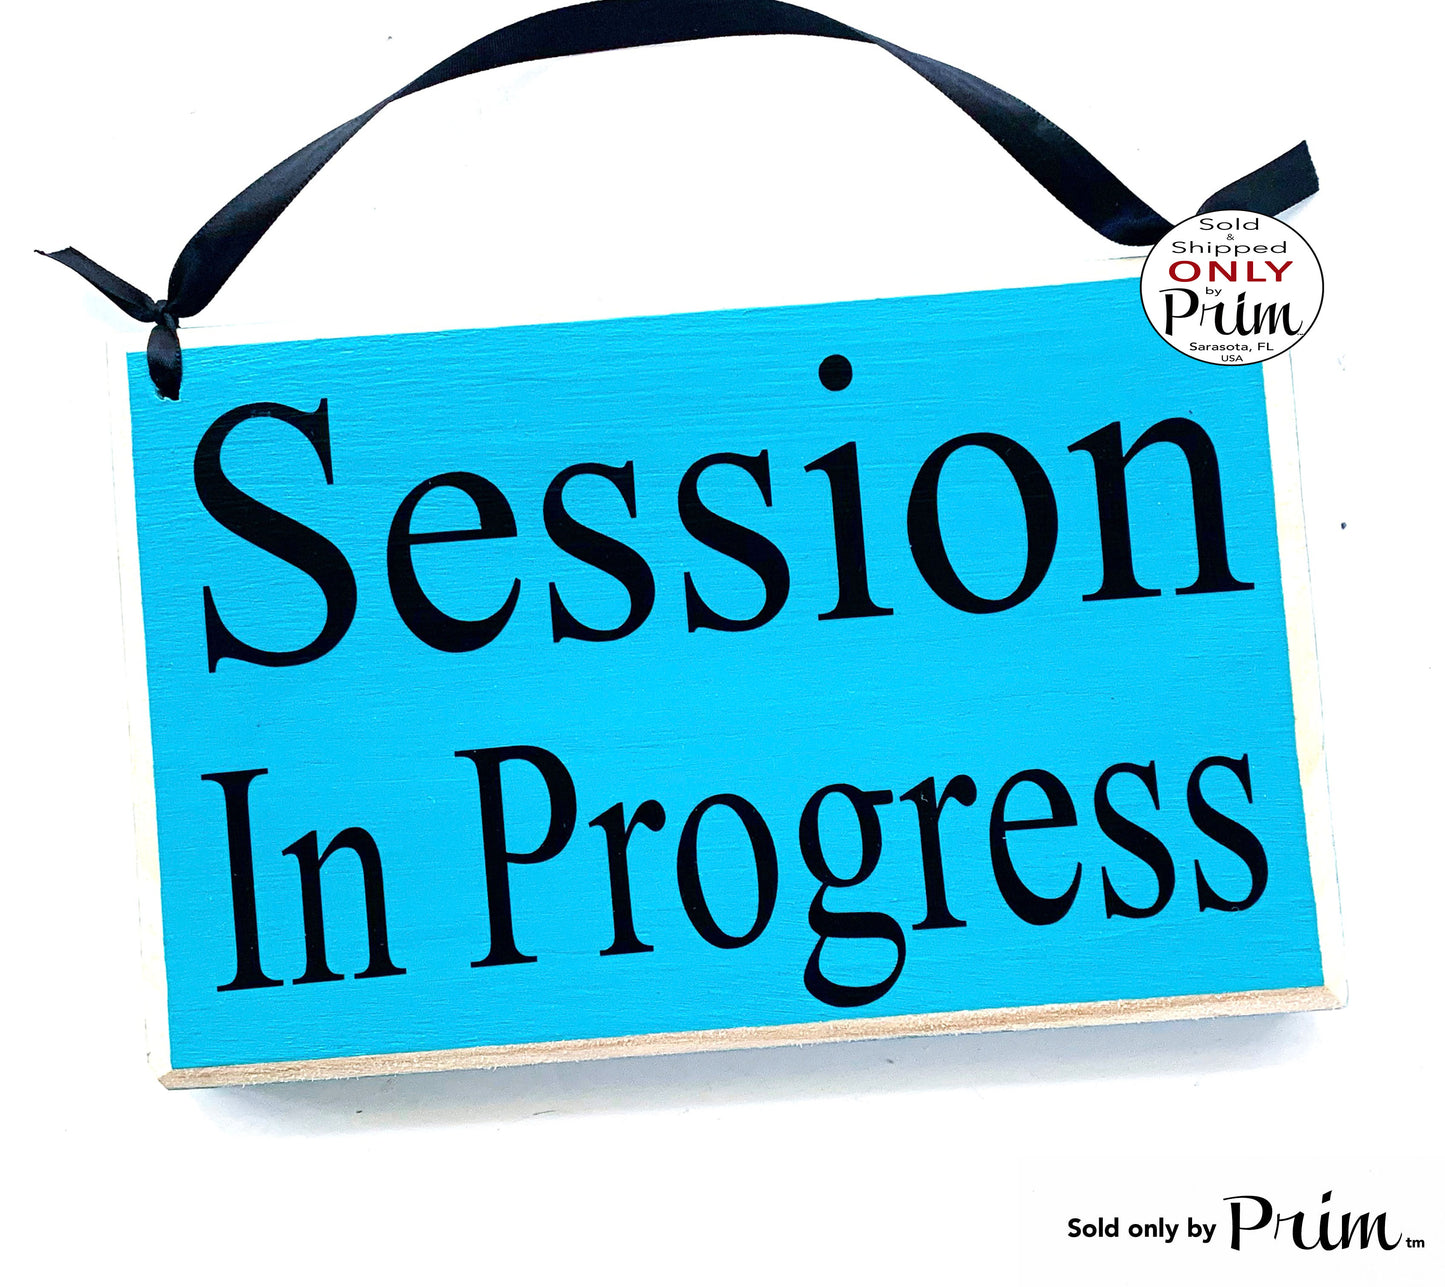 8x6 Session in Progress Custom Wood Sign Busy Please Do Not Disturb Welcome Meeting Quiet Work Cubicle Office Conference Wall Door Plaque Designs by Prim